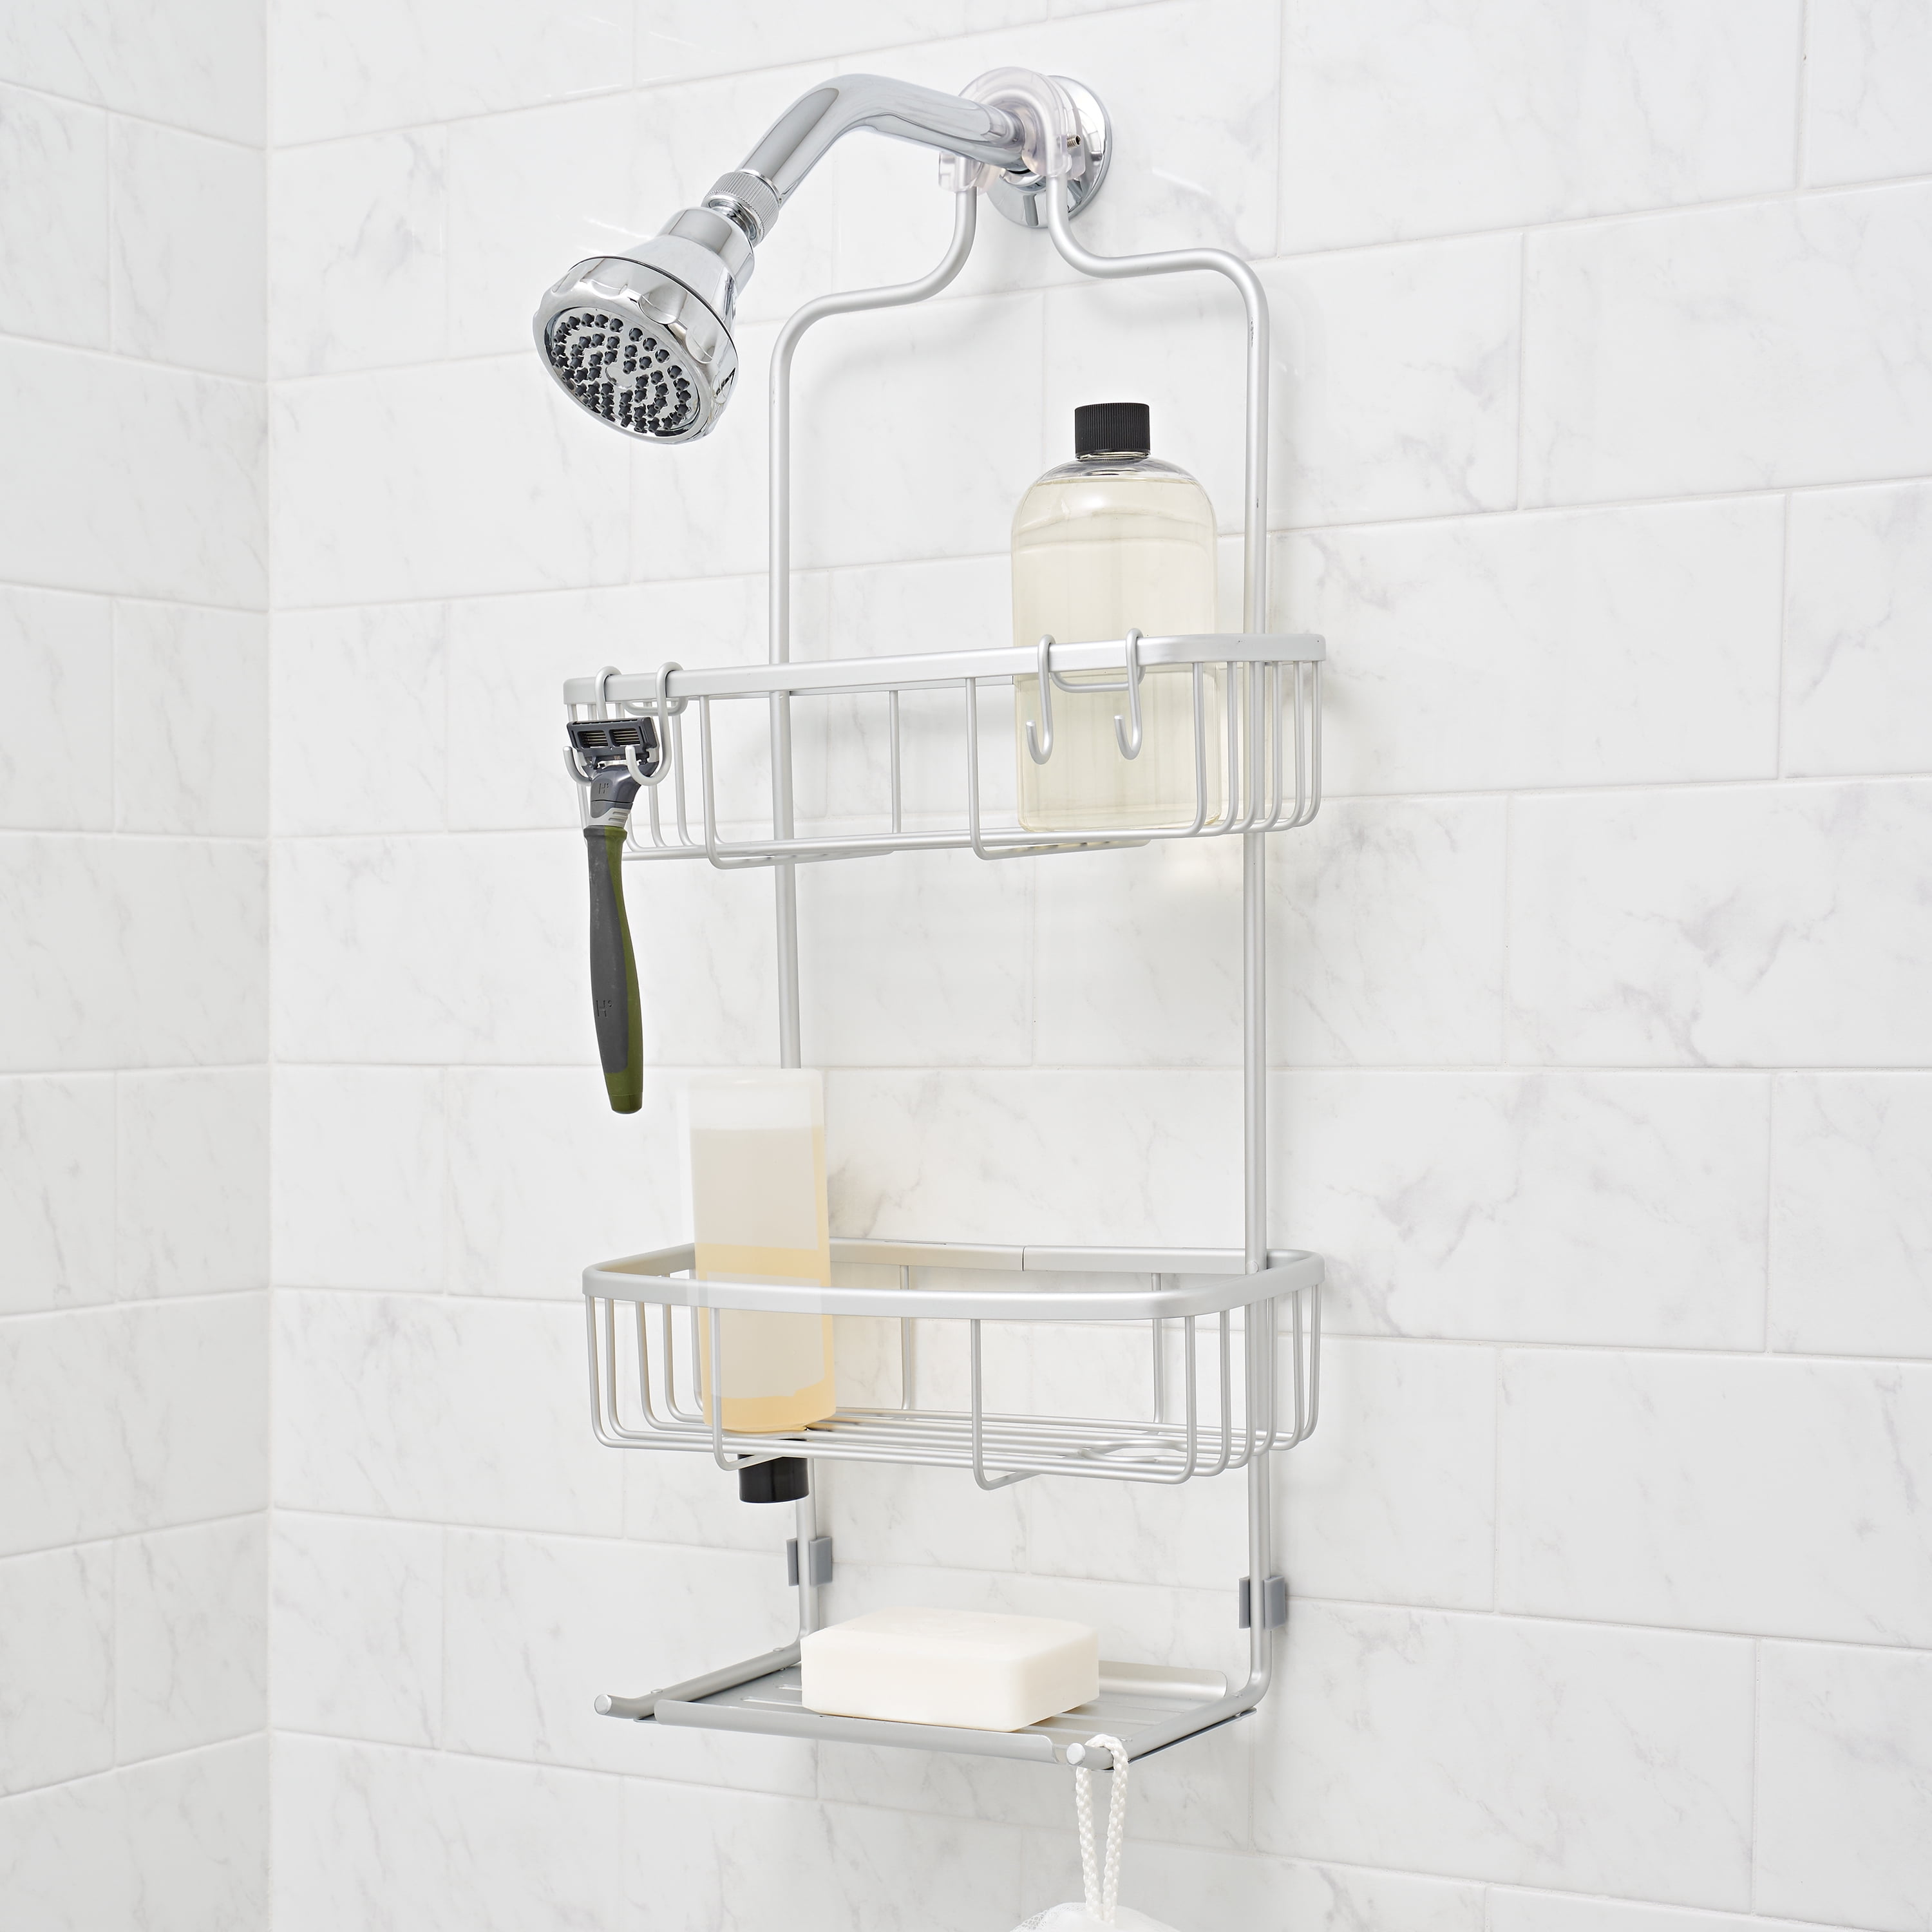 Expandable Over the Shower Caddy Versatile Storage for Your Shower Chrome 